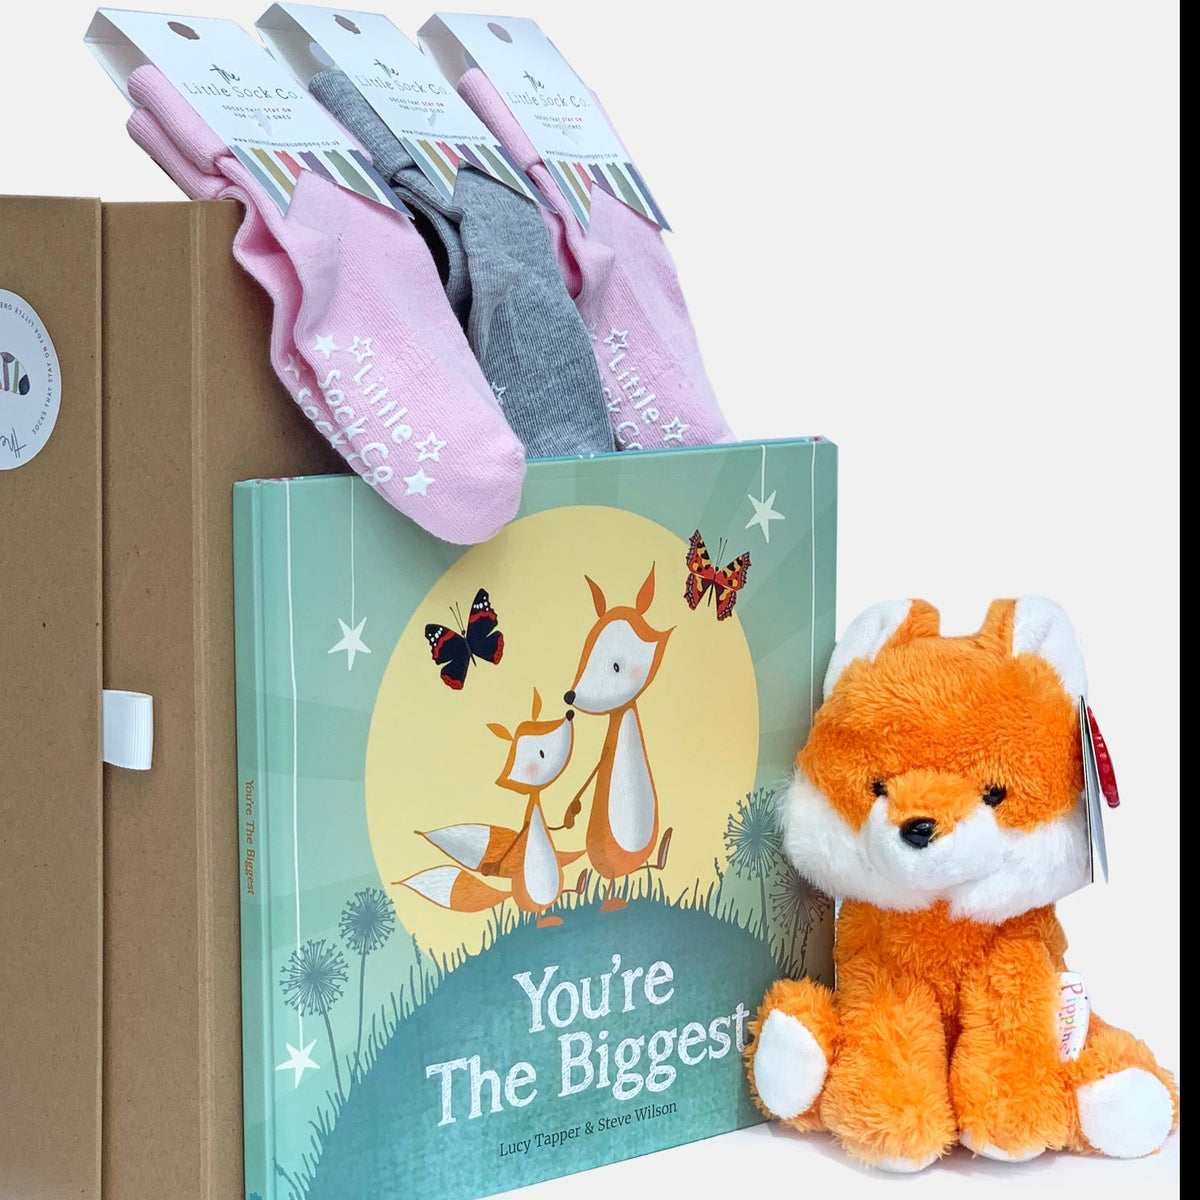 Welcome to the World + Sibling - Luxury Gift Set Combo - Something for a Newborn & their older Brother or Sister